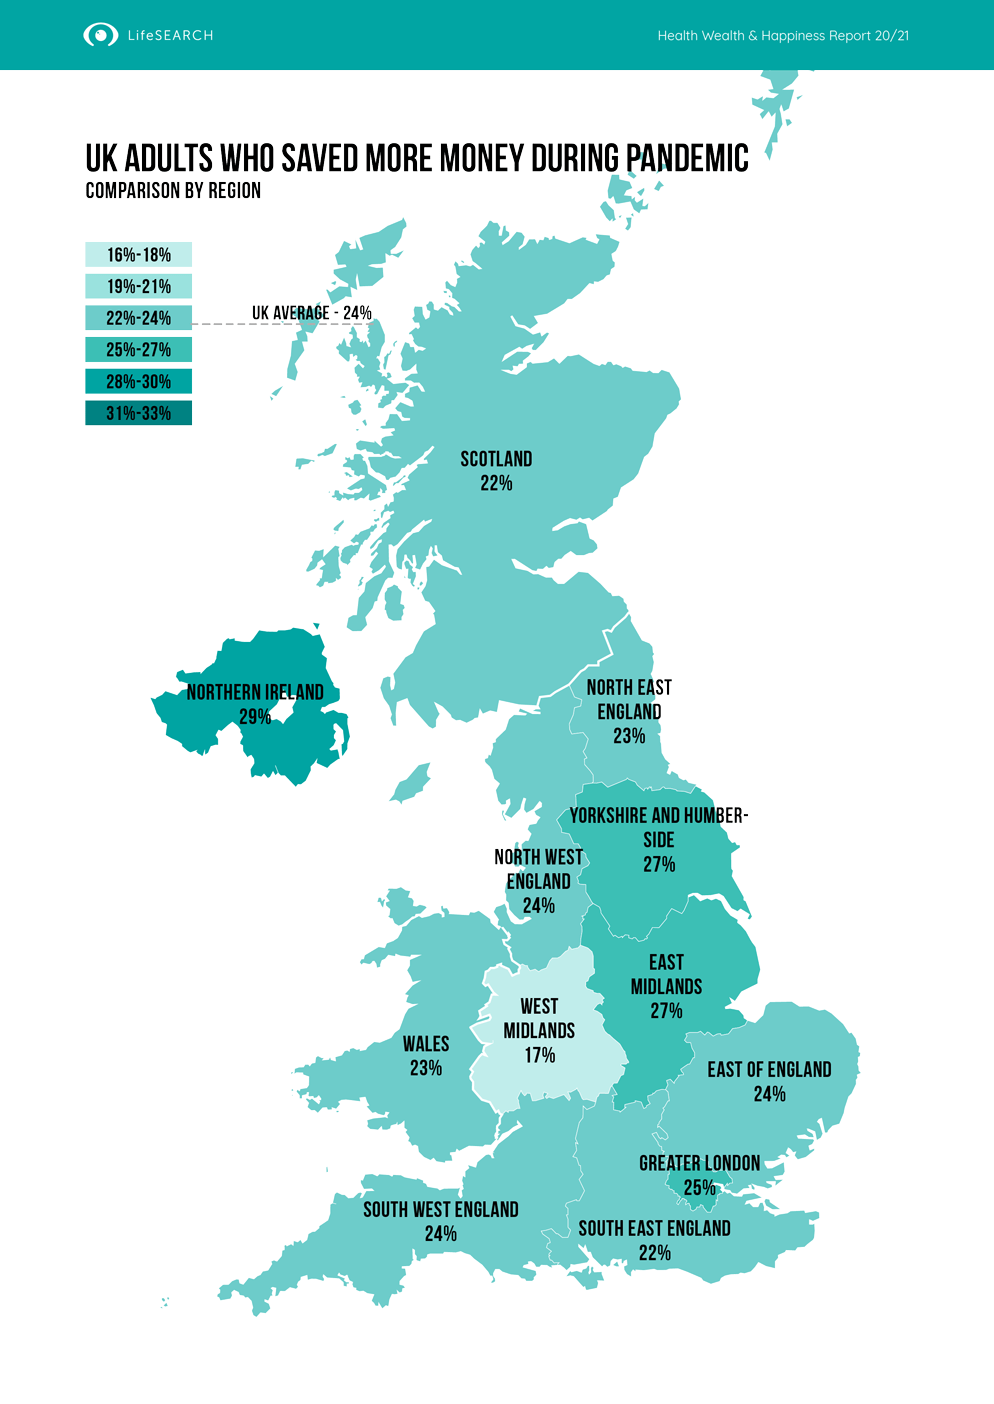 Wealth - UK Adults Who Saved More Money During The Pandemic by Location. The Midlands stand out